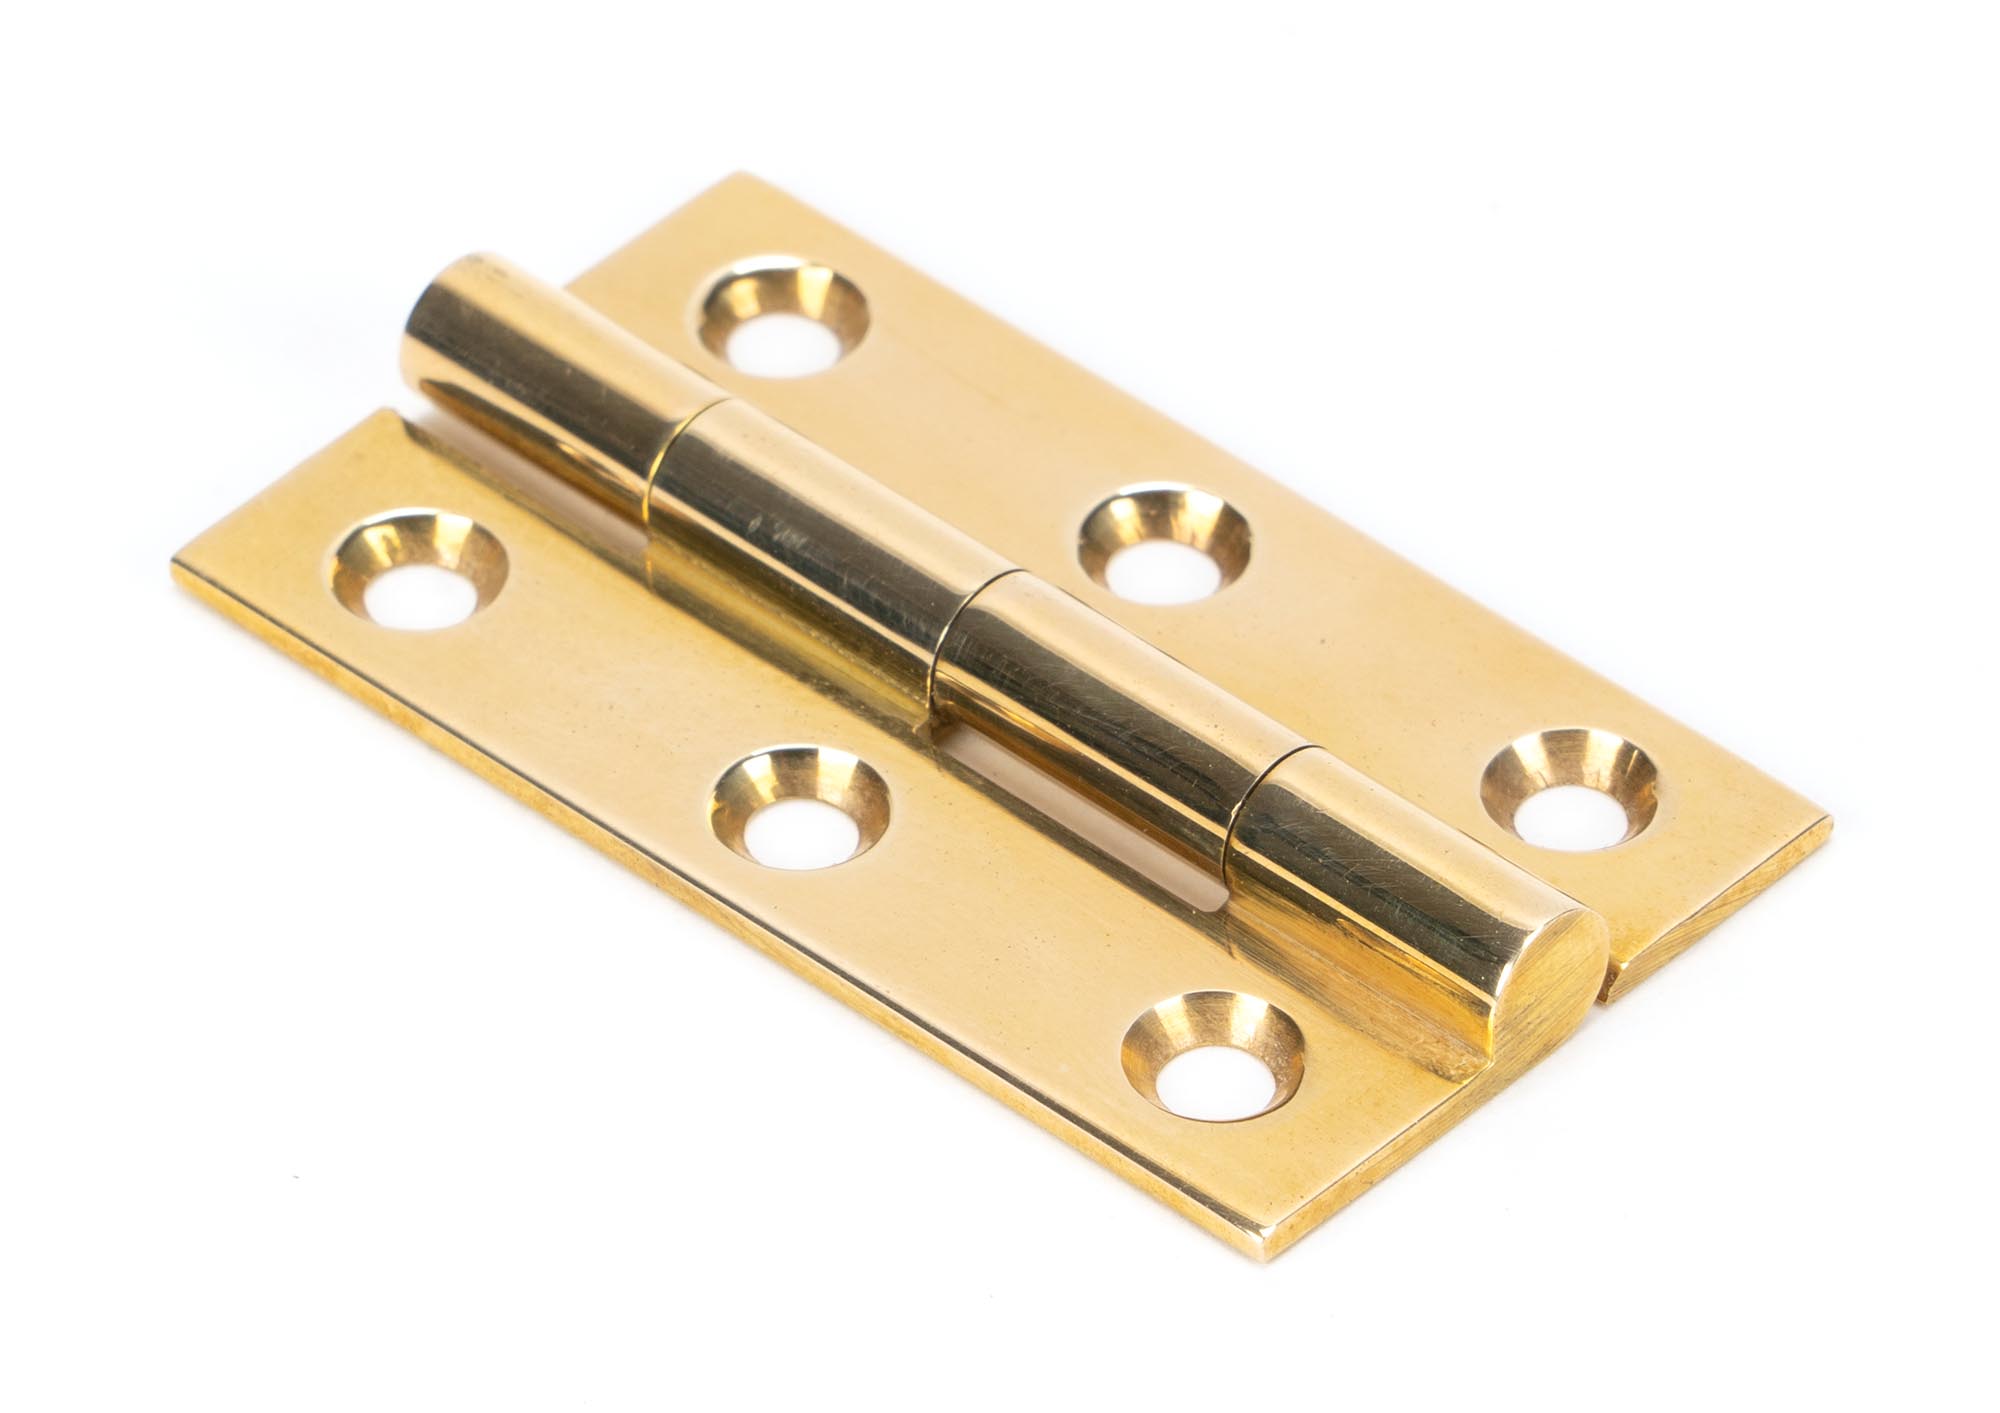 Polished Brass 2" Butt Hinge (pair)